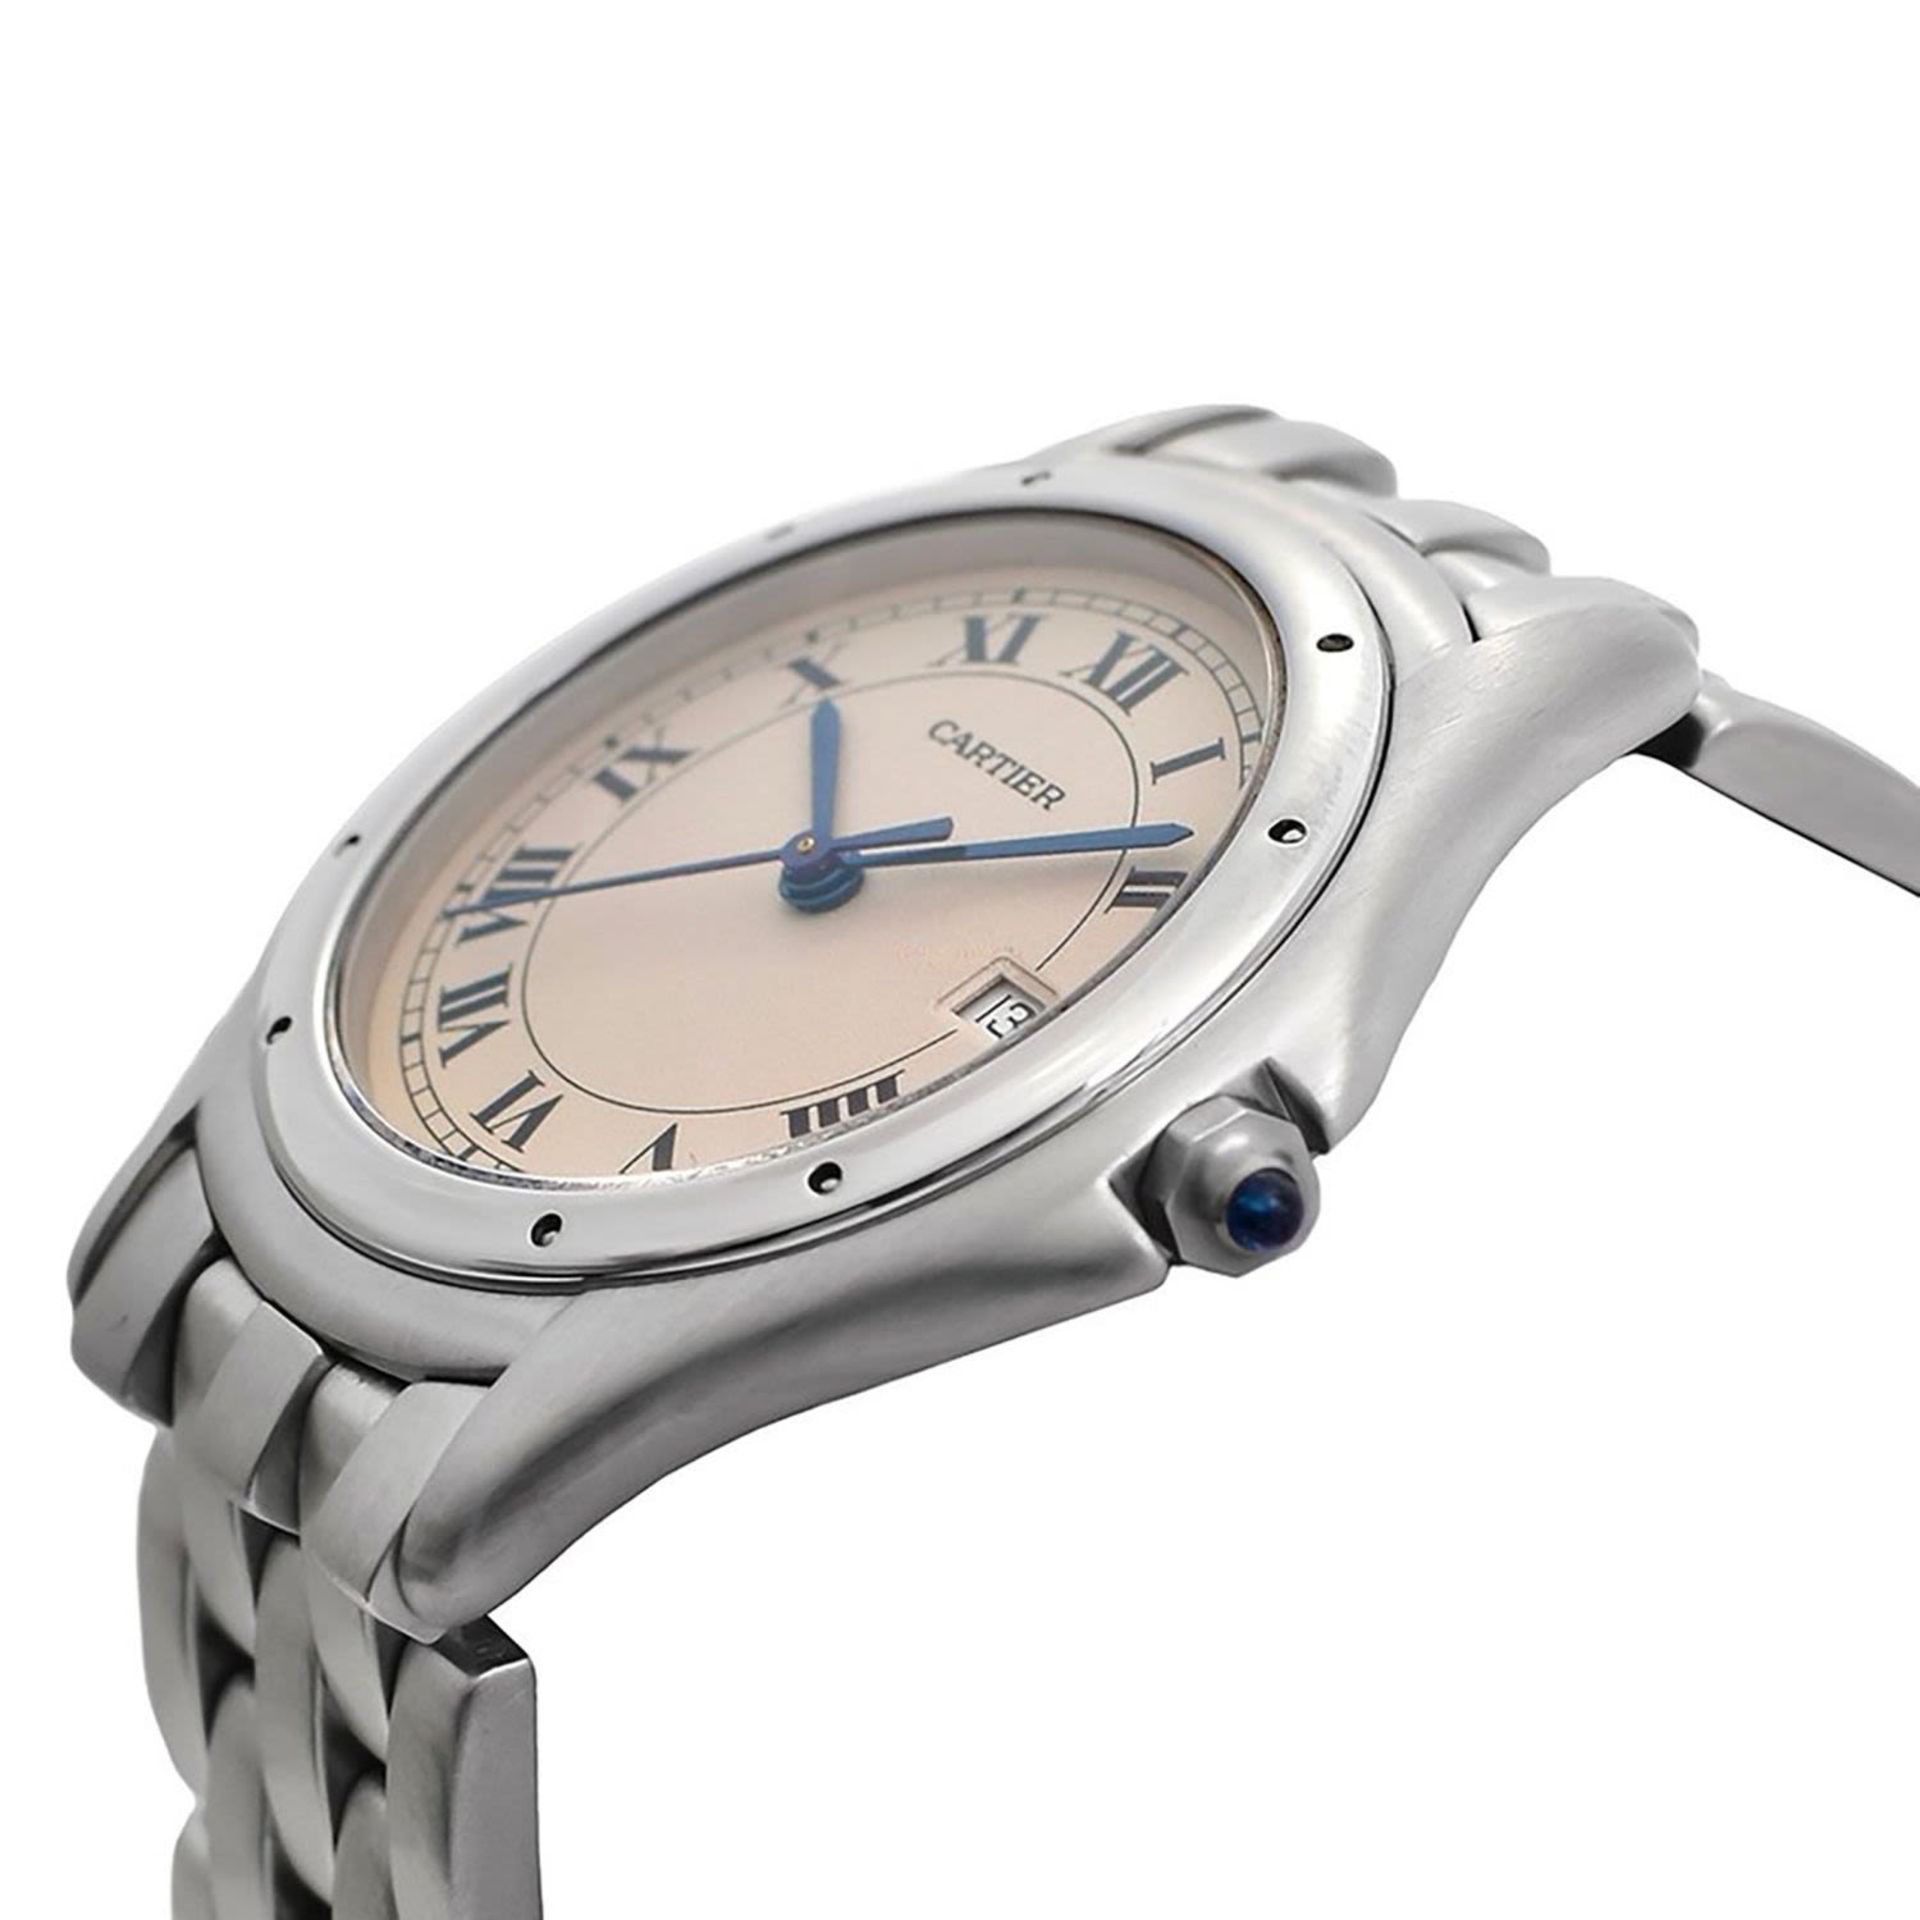 Cartier Cougar cadet wristwatch in steel ivory dial - Image 2 of 5